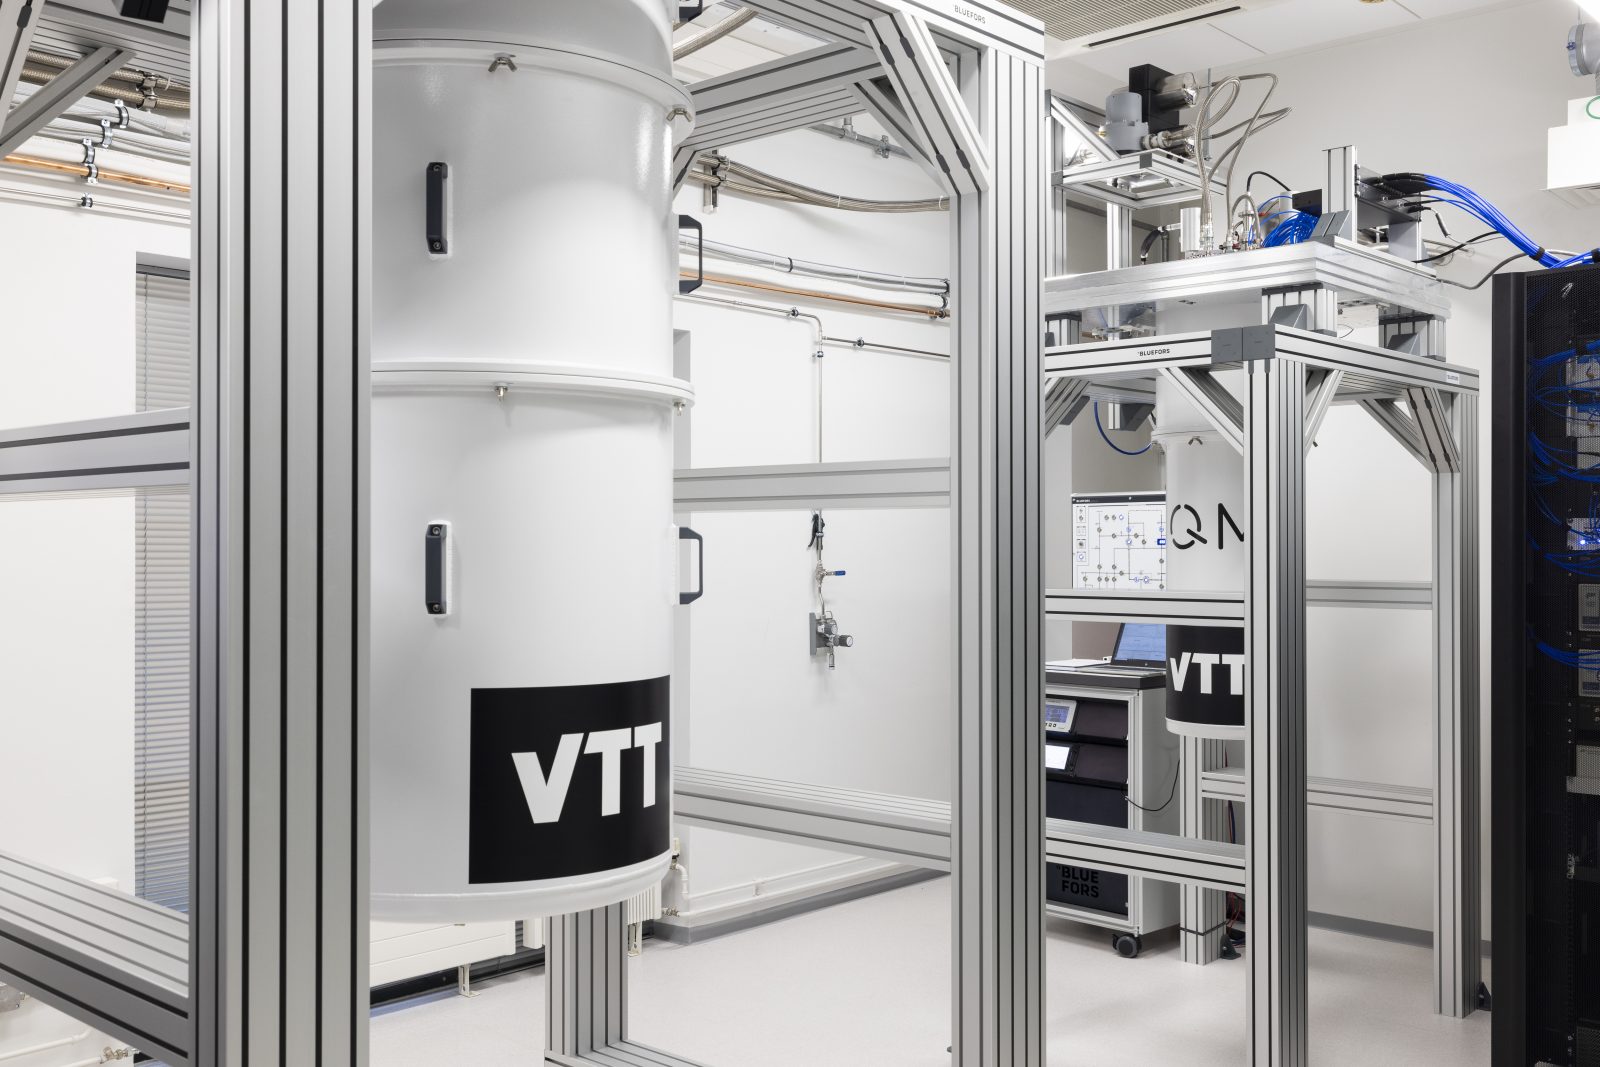 VTT develops technologies to scale up quantum computers